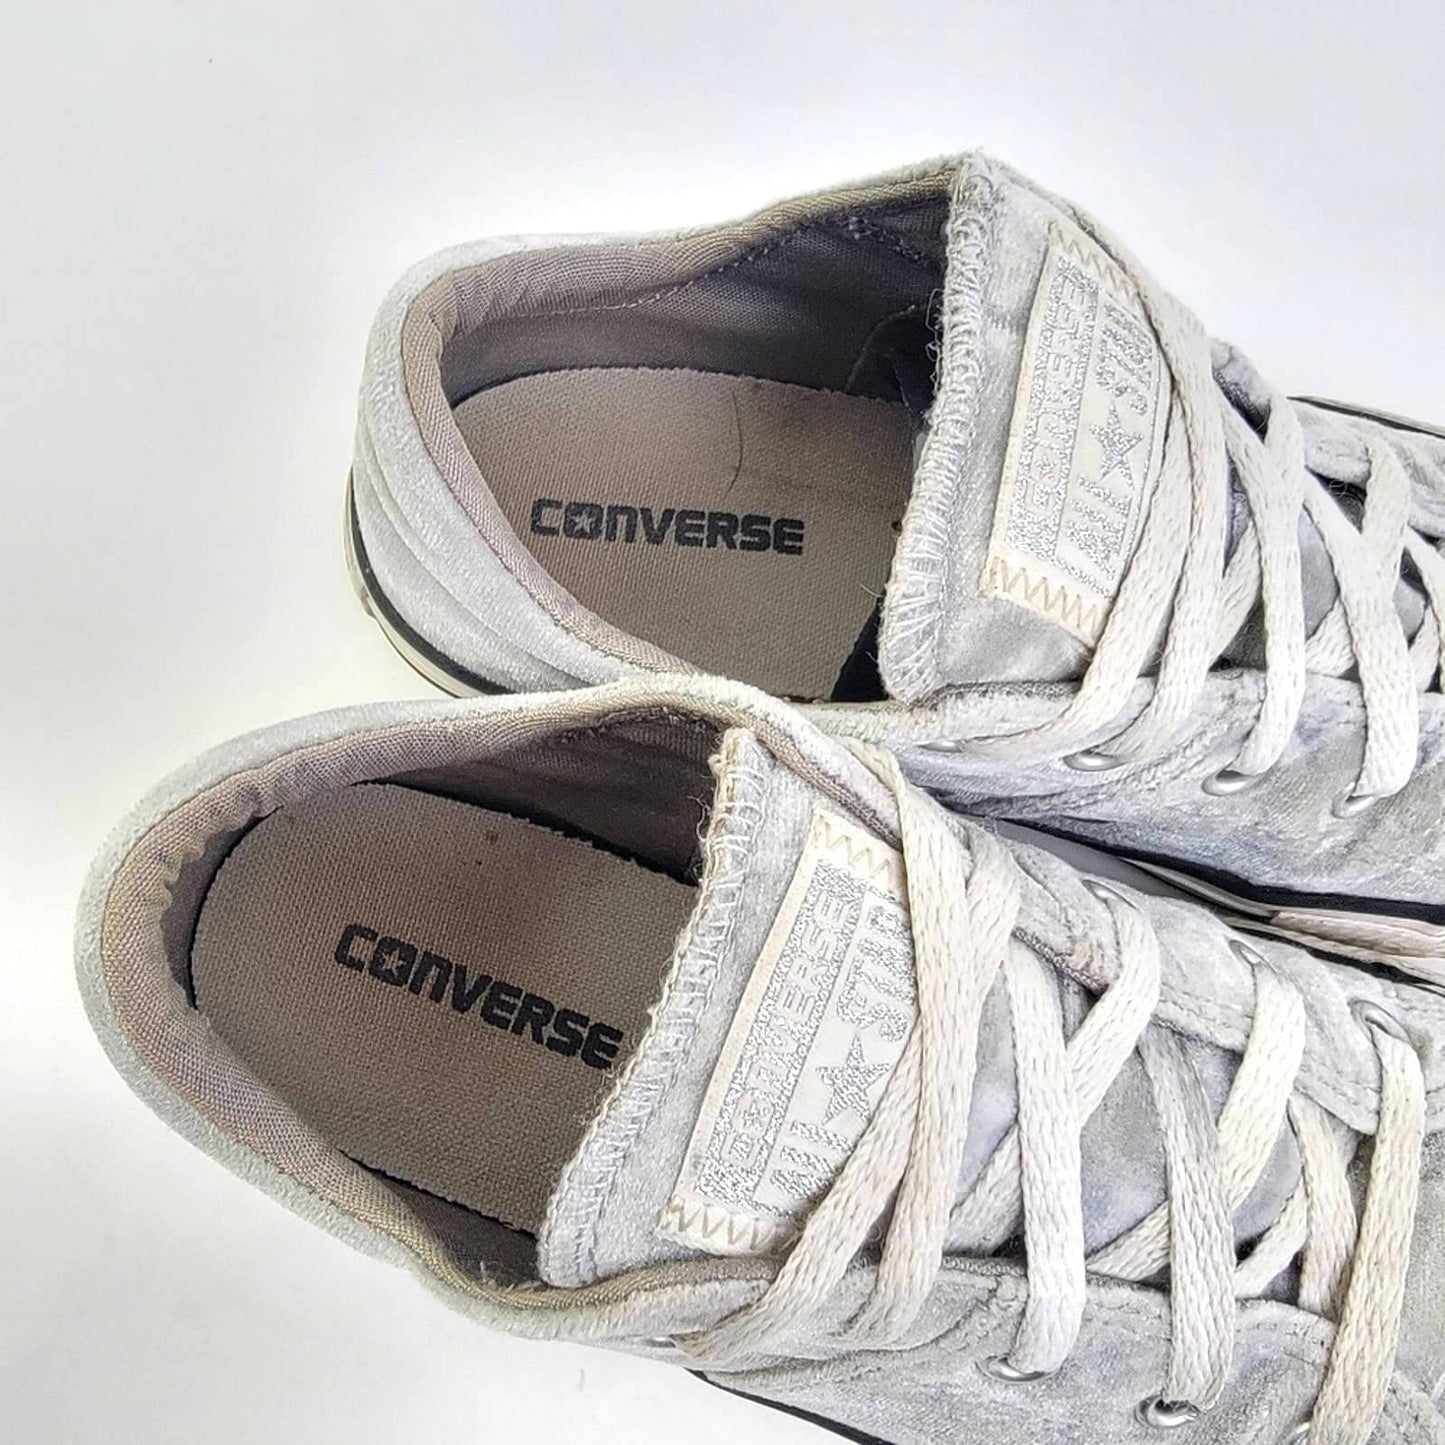 Converse All Star Chuck Taylor Low Top Madison Ox Velvet - 2C